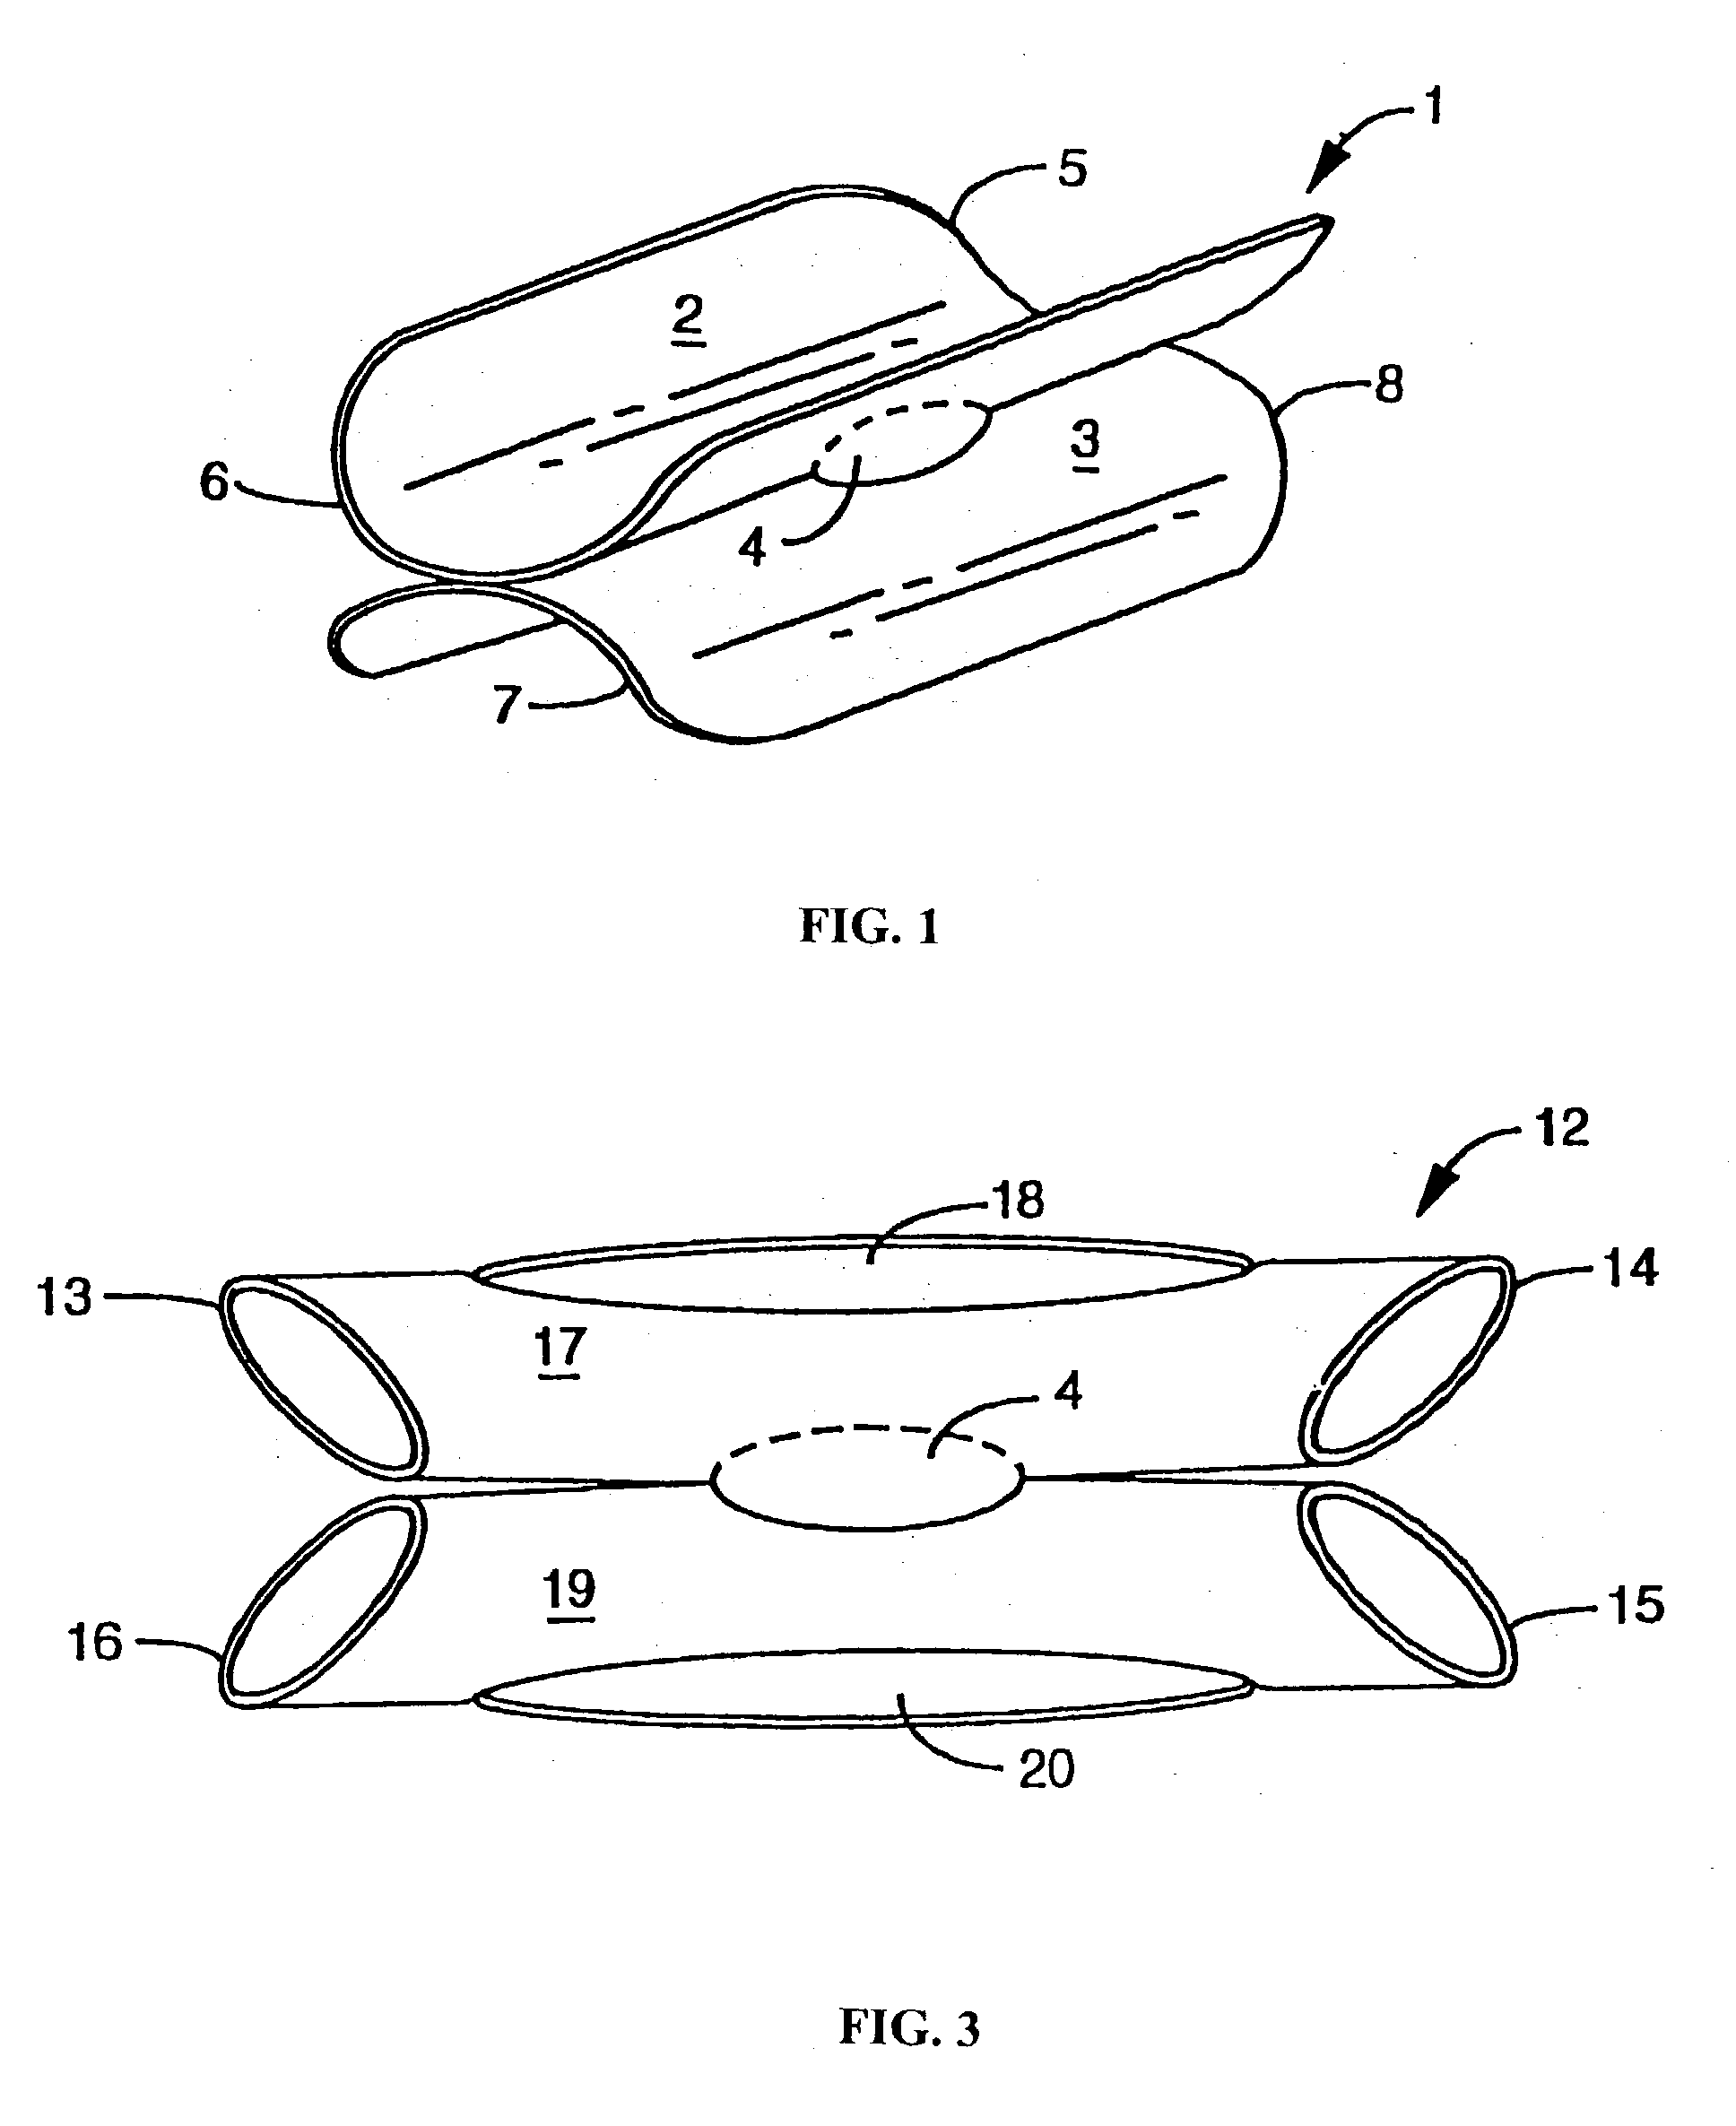 Devices and methods for interconnecting conduits and closing openings in tissue